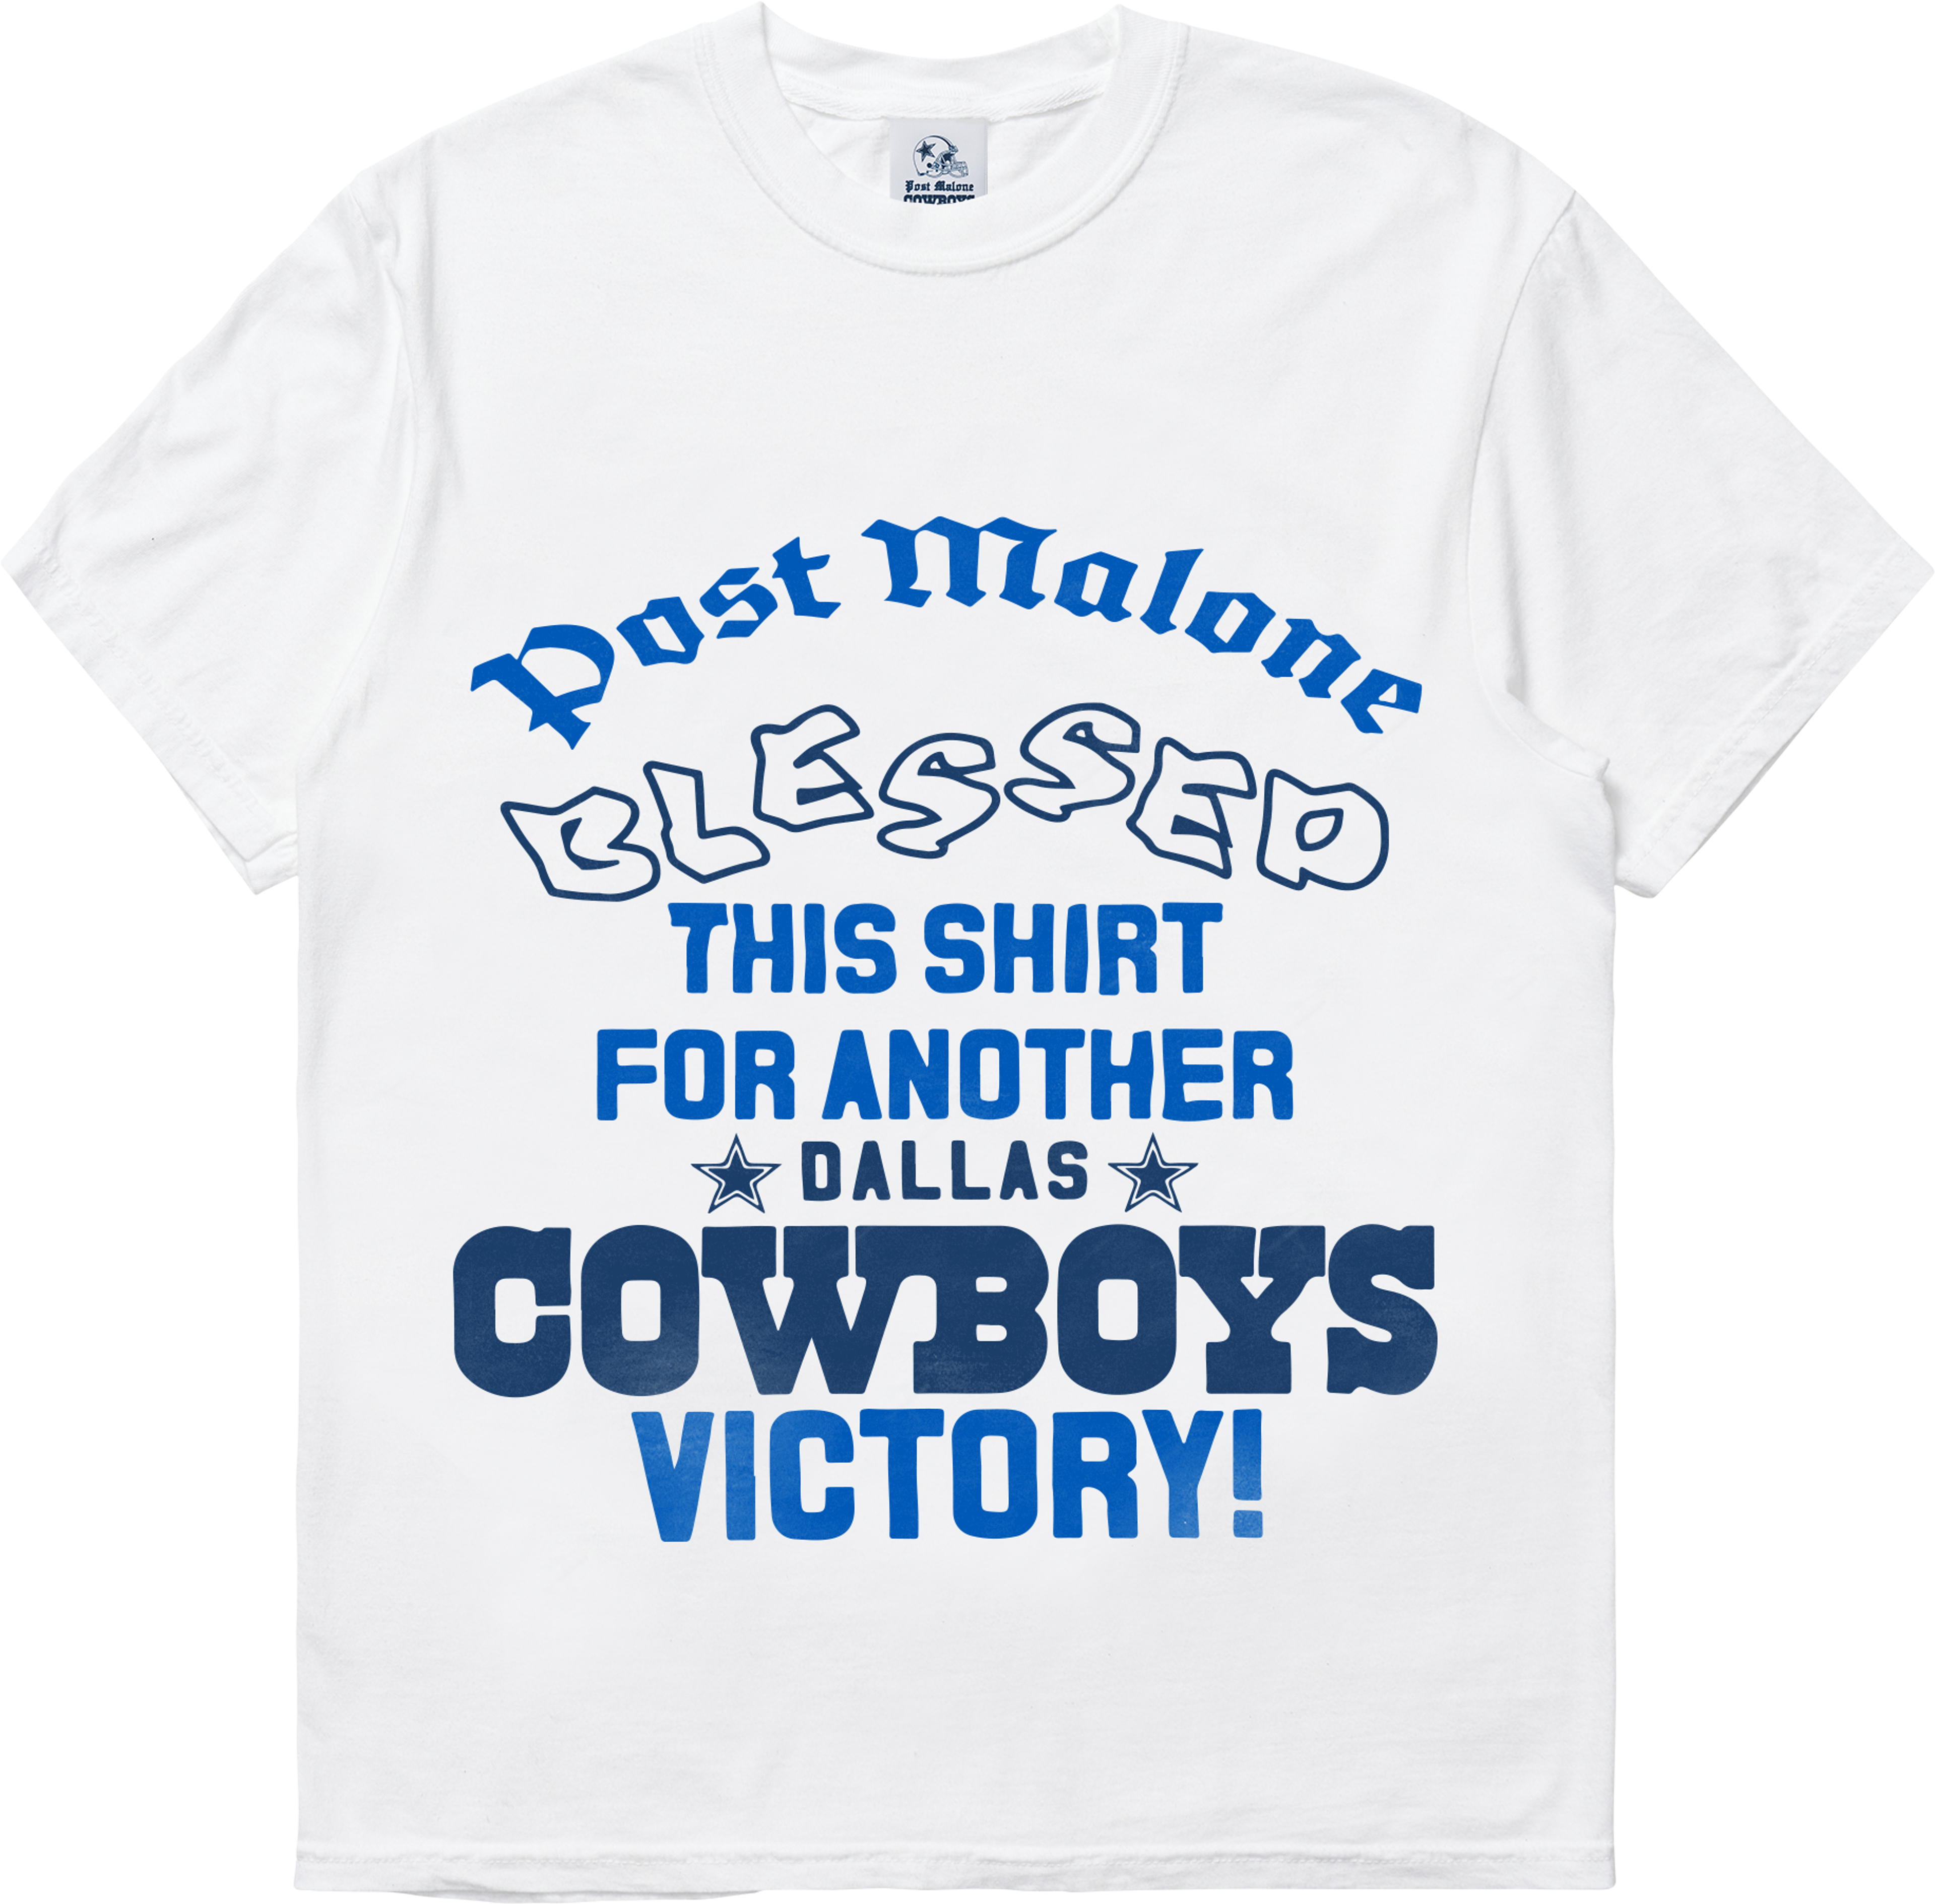 Post Malone + Dallas Cowboys Blessed Tee